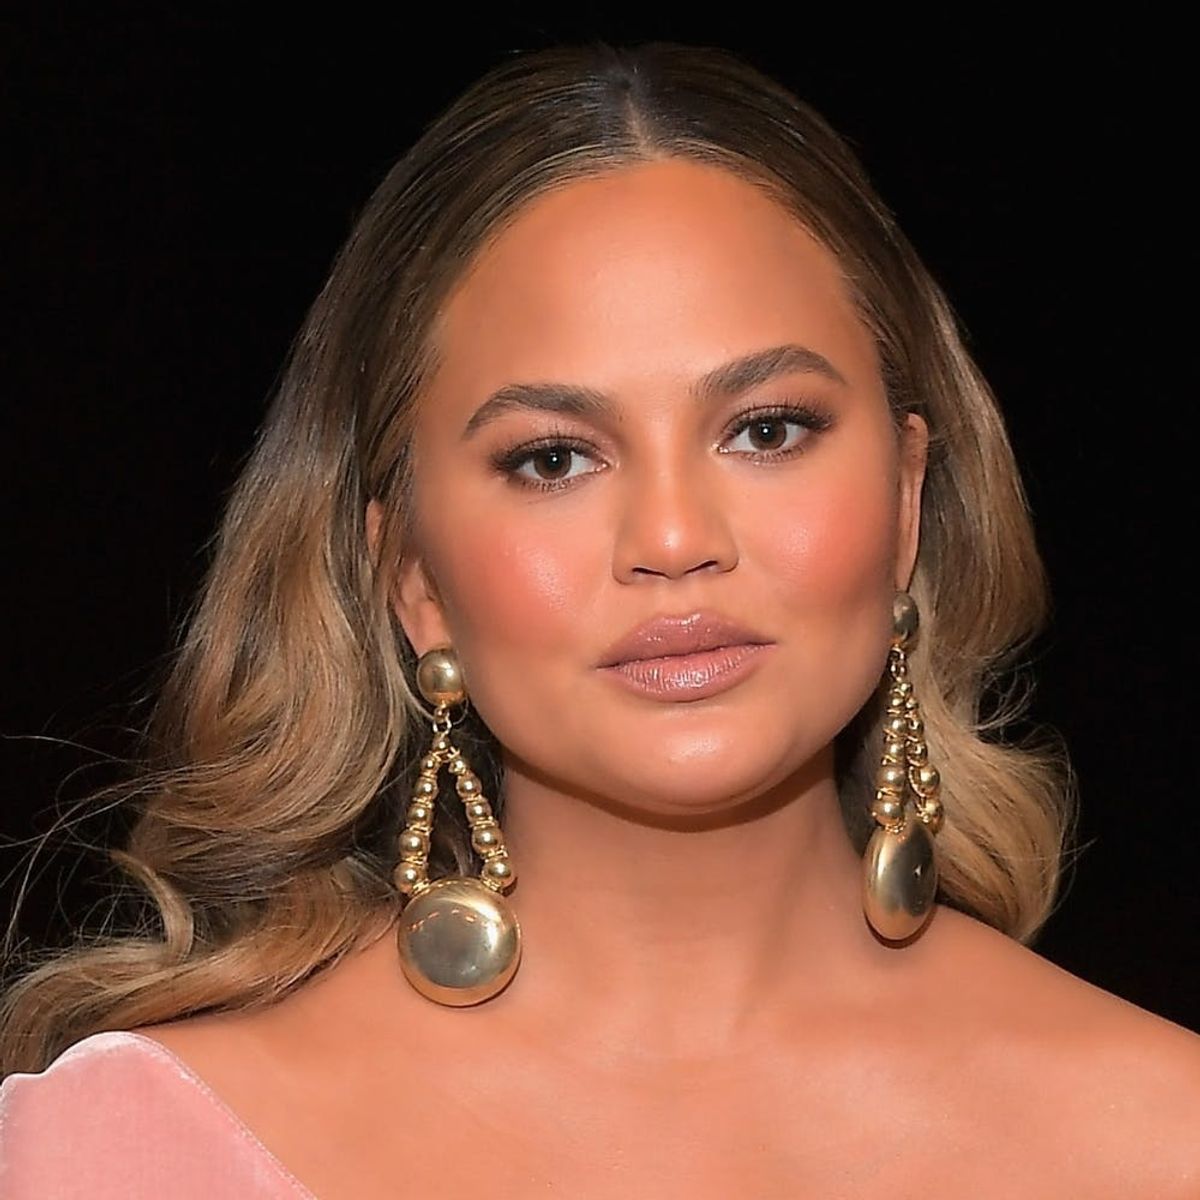 Chrissy Teigen Says She Was “Wrong” for Logan Paul Remarks After a New Controversial Video Surfaces